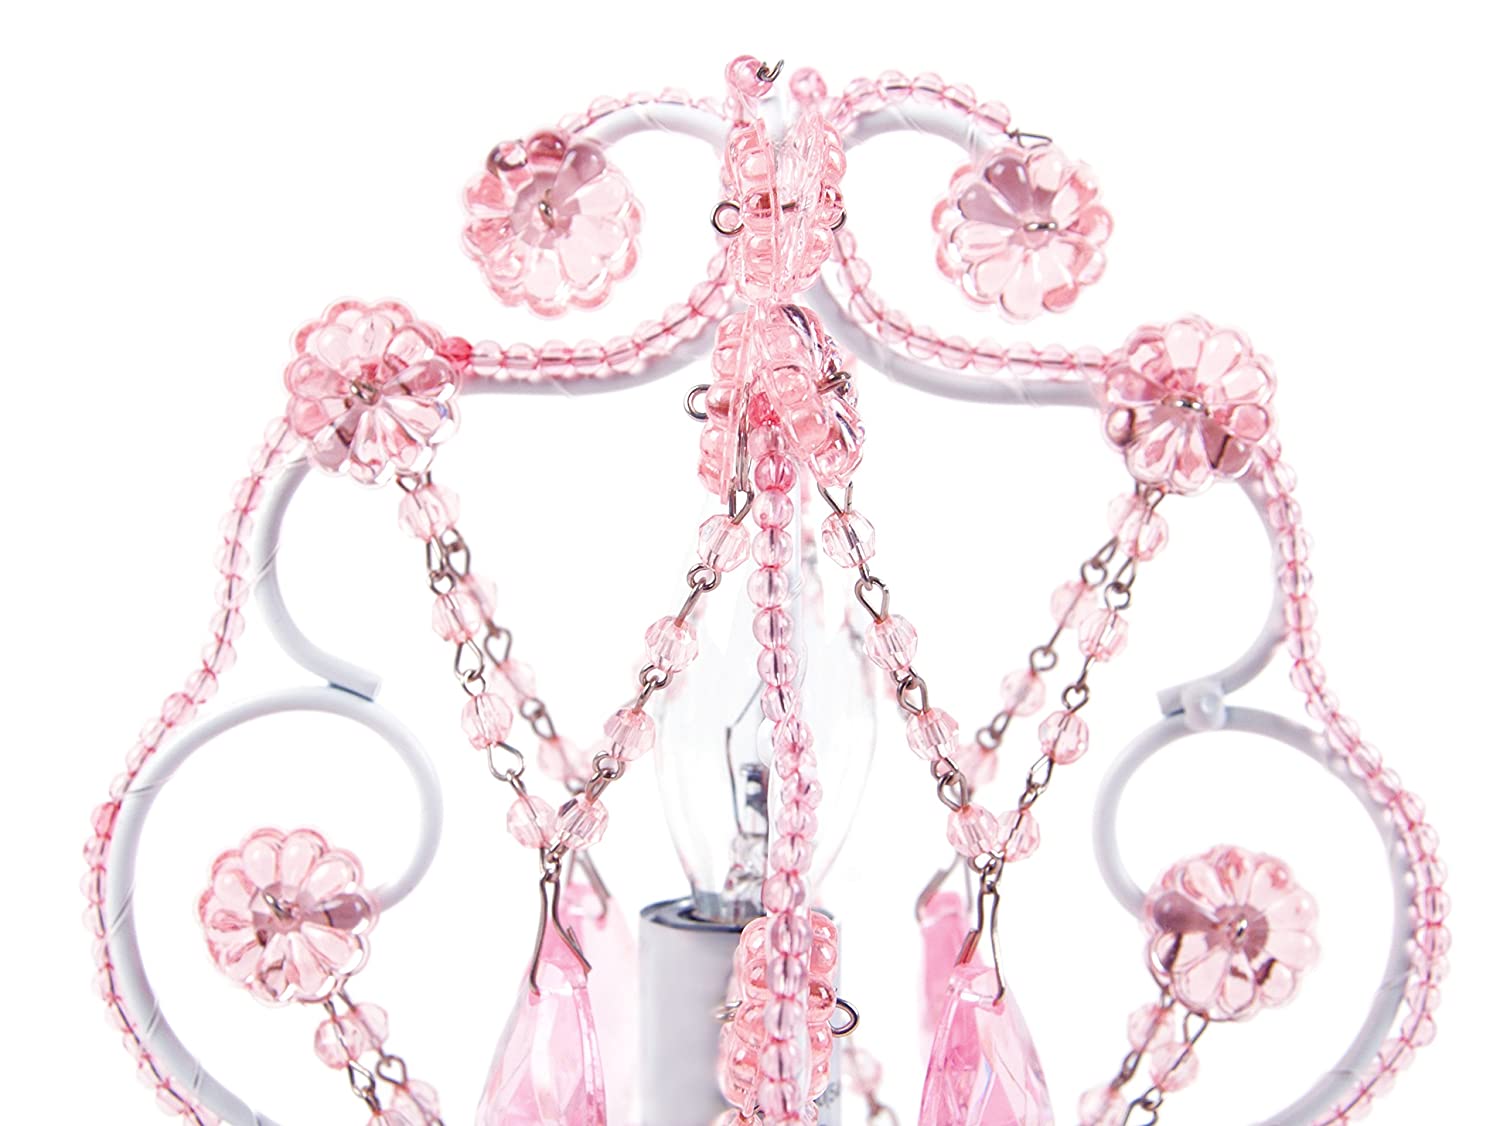 Tadpoles Chandelier Mini Table Lamp, Pink - image 2 of 5